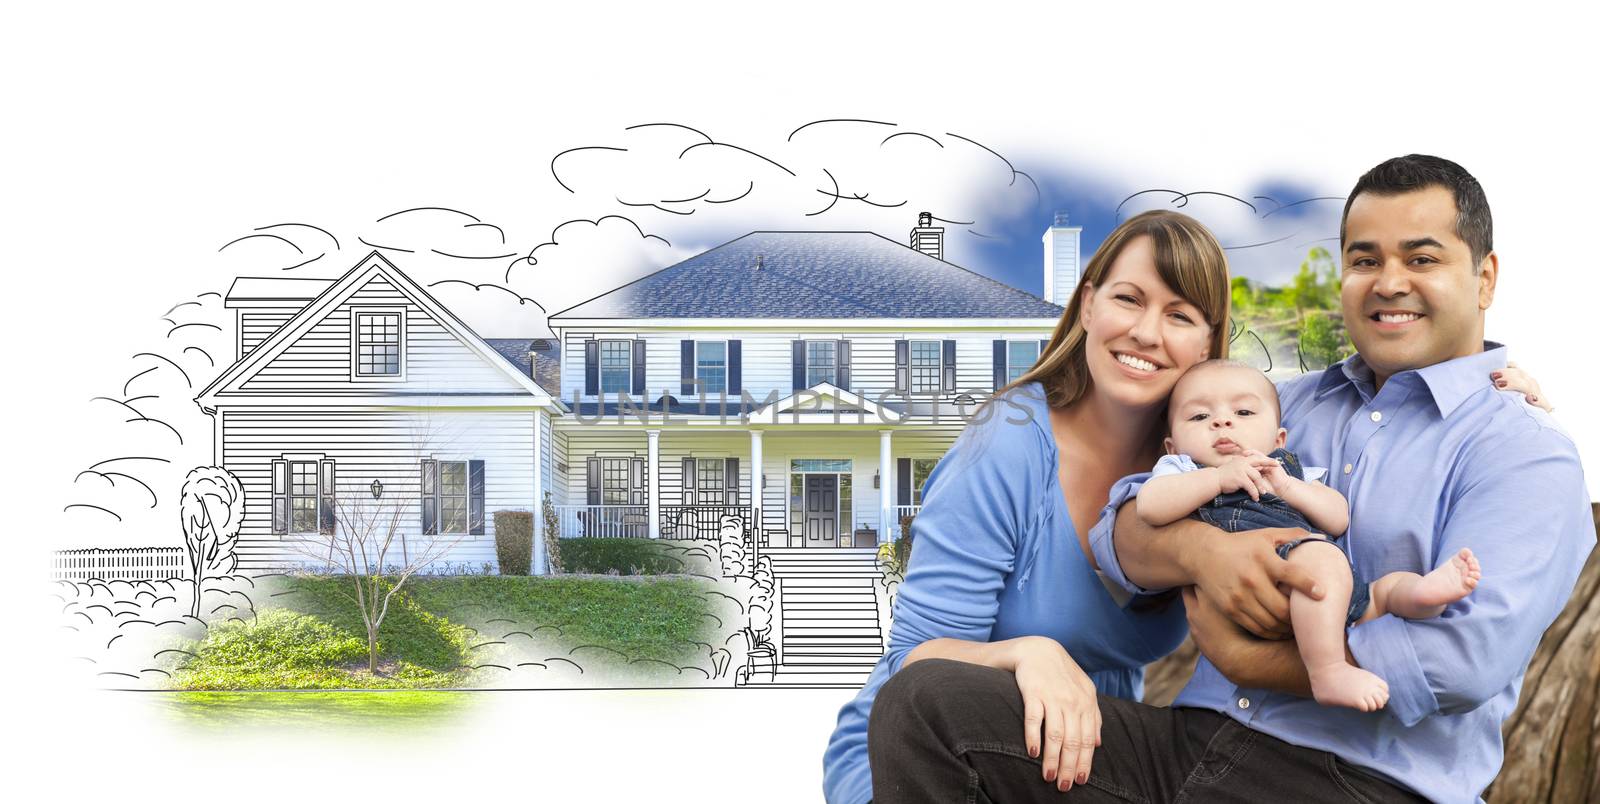 Mixed Race Couple with Baby Over House Drawing and Photo Combination on White.